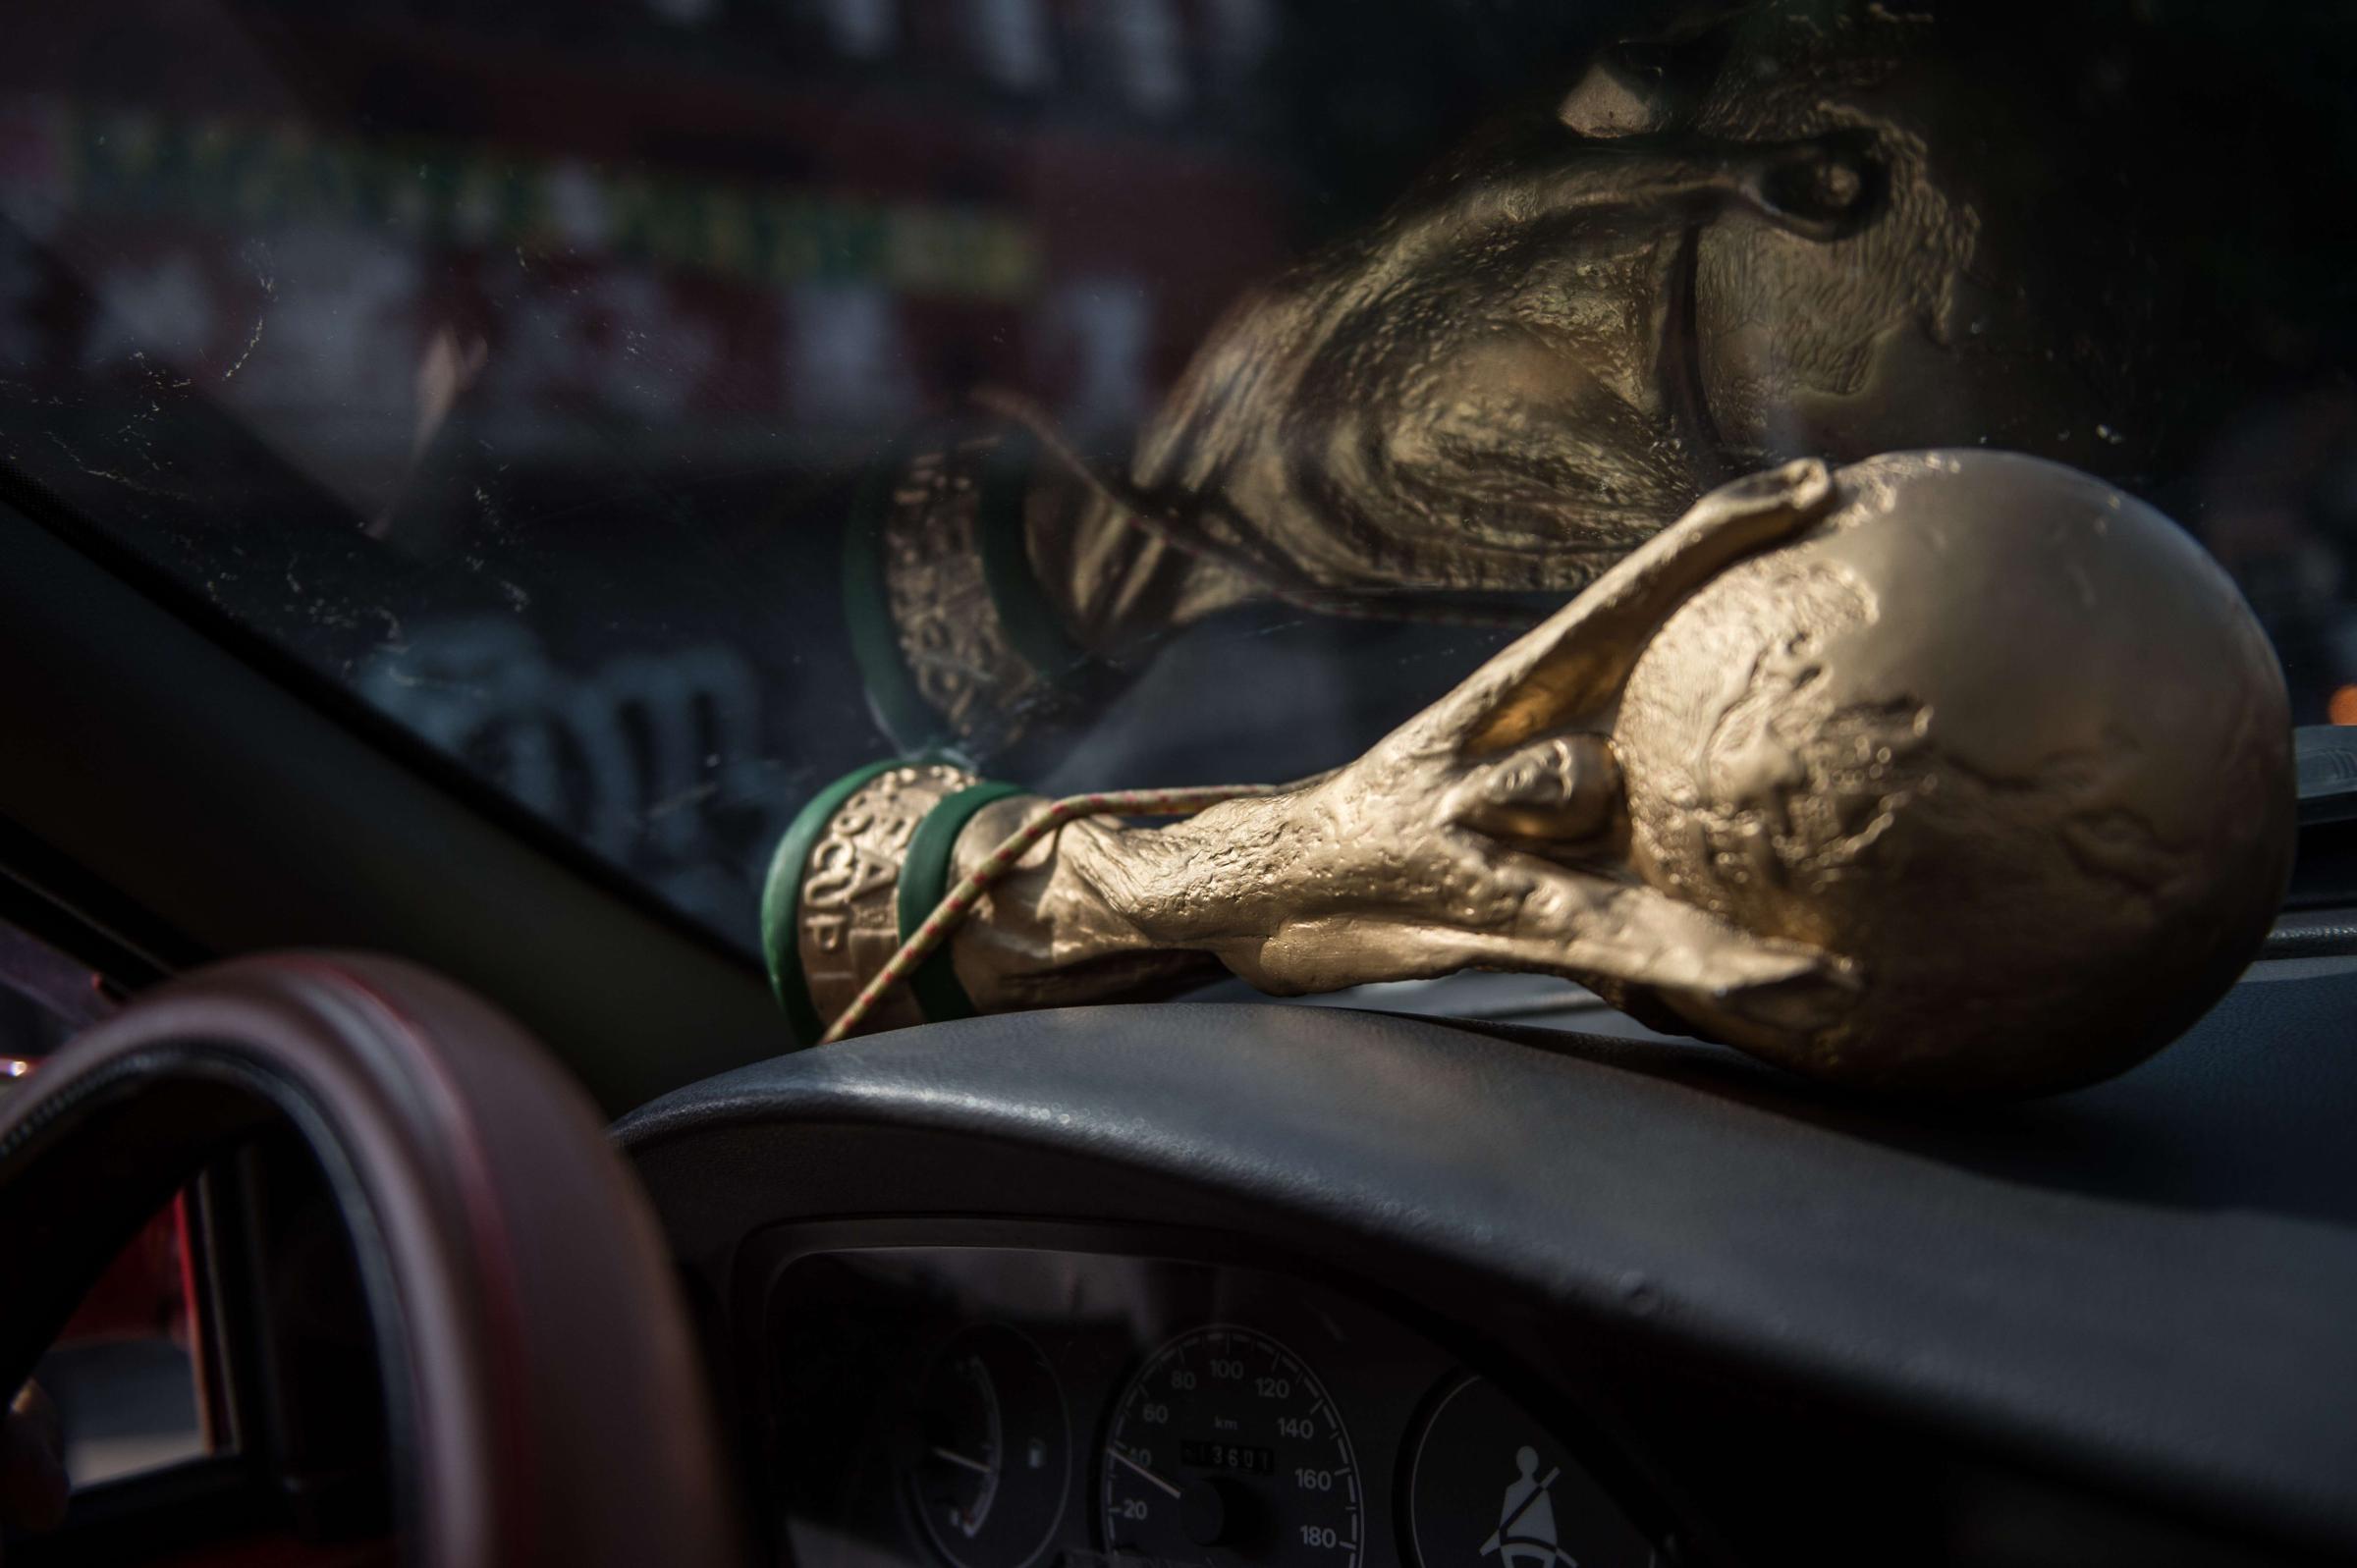 Jarbas Menighini has one of his hand made trophies in his car on the day he is to see the first of four matches of the FIFA World Cup at Maracana stadium in Rio de Janeiro, Brazil, on June 18, 2014.